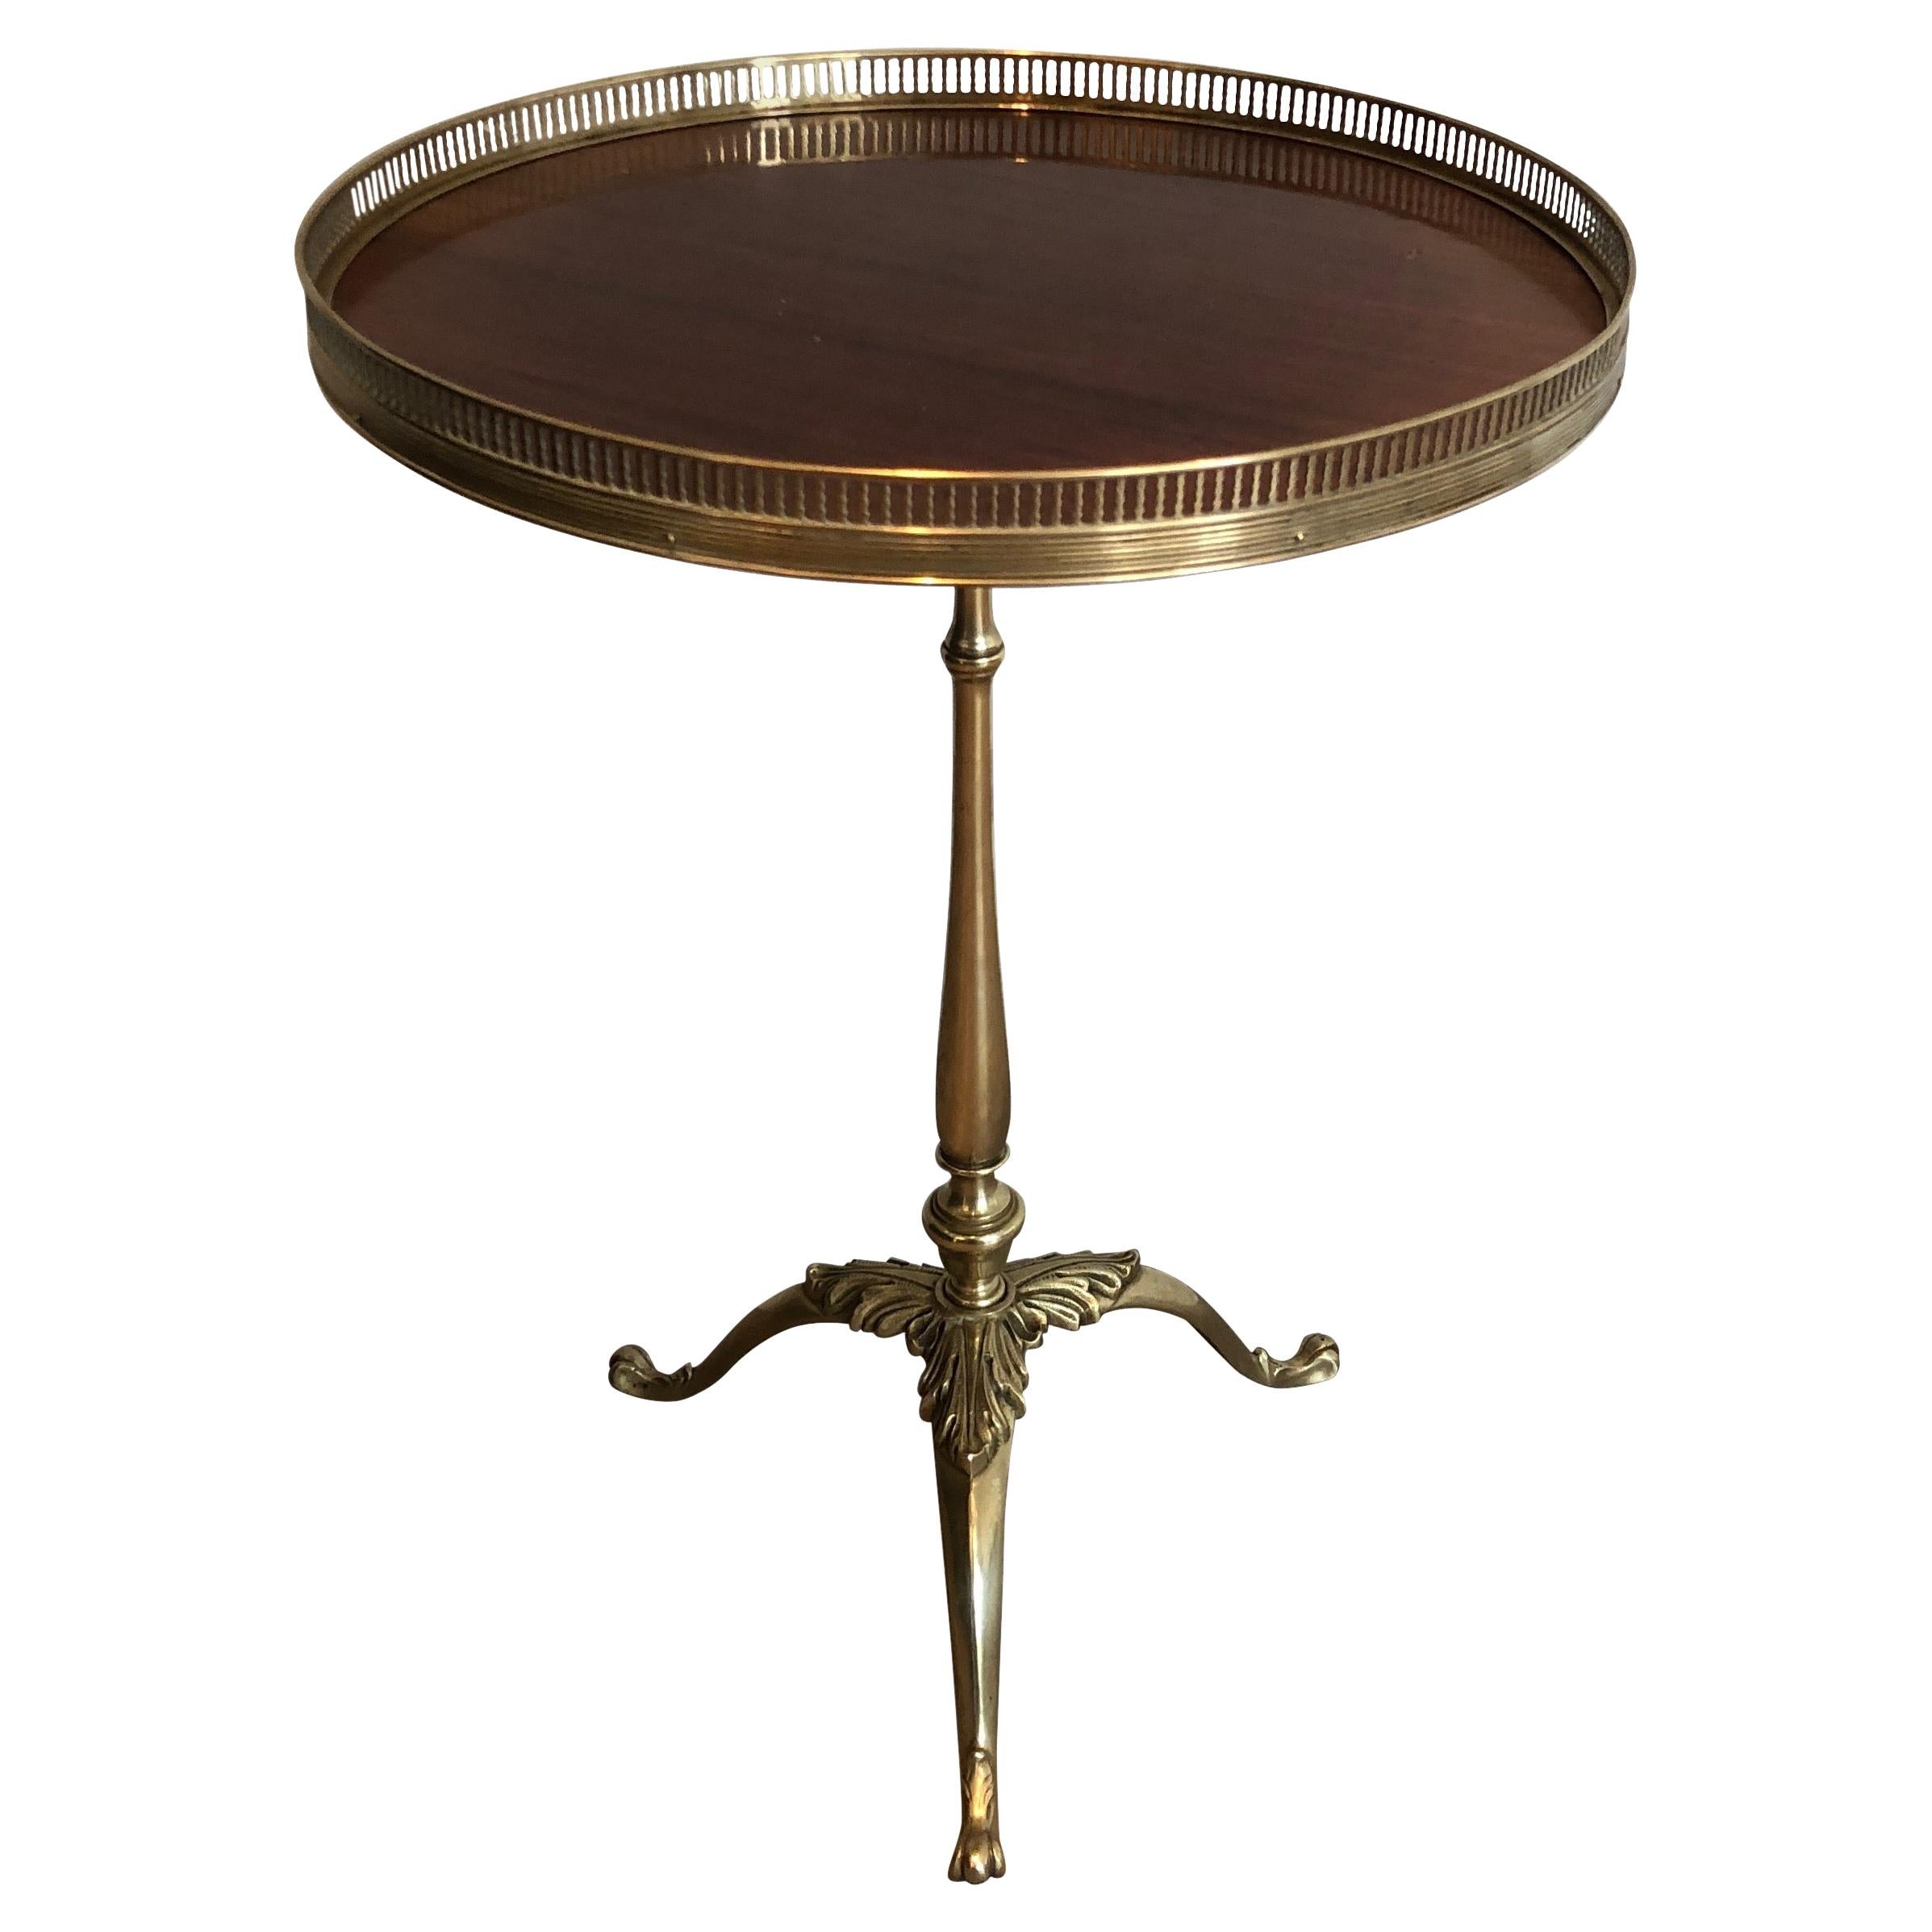 Attributed to Maison Jansen, Neoclassical Style Brass and Mahogany Side Table